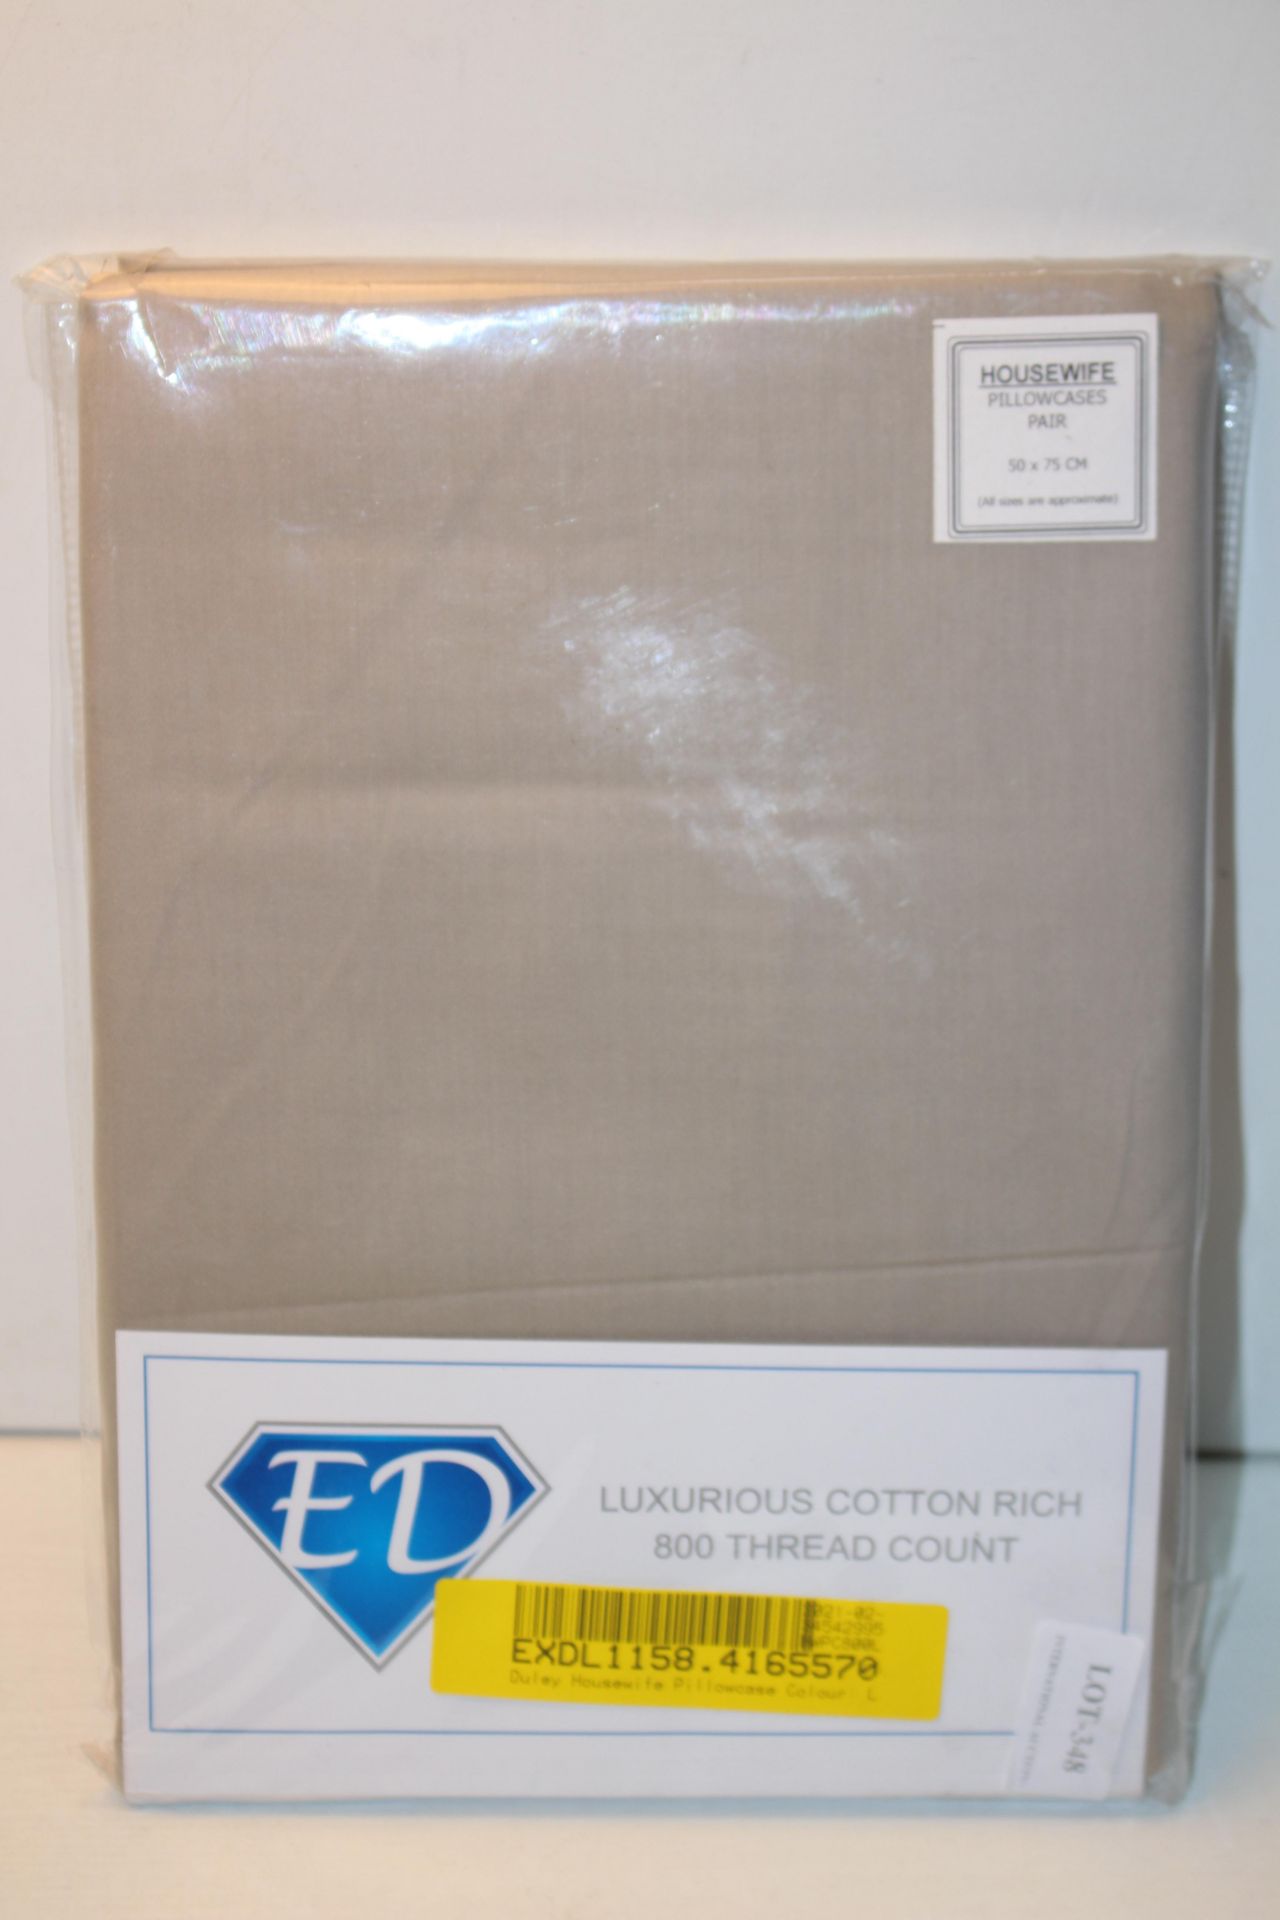 ED LUXURIOUS COTTON RICH 800 THREAD COUNT PILLOWCASESCondition ReportAppraisal Available on Request-